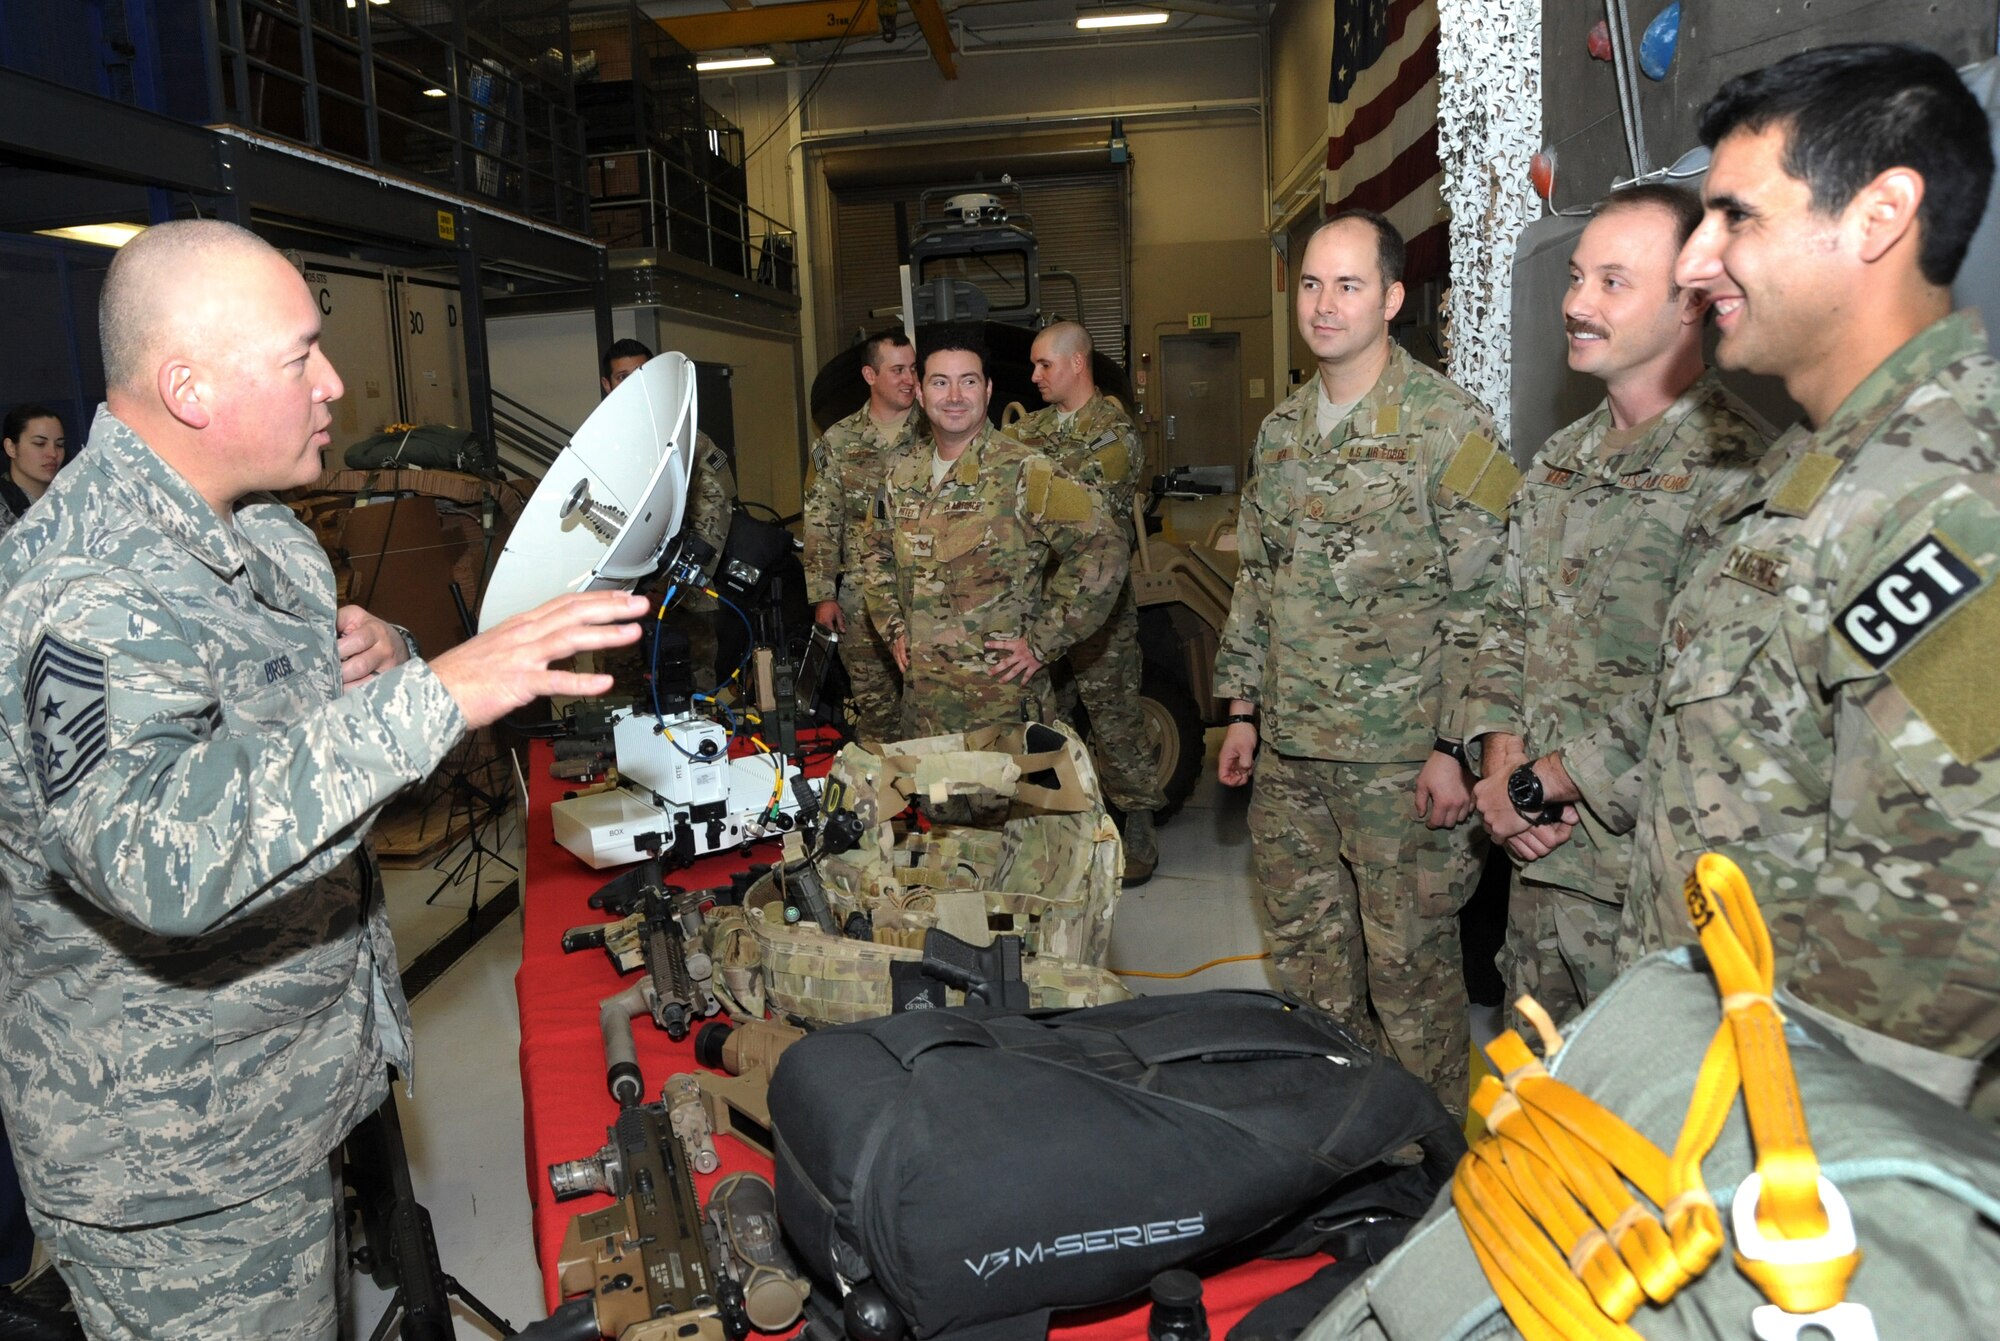 Chief Master Sgt. Mitchell O. Brush, Senior Enlisted Advisor for the National Guard Bureau, left, meets members of the 125th Special Tactics Squadron during his tour of the Portland Air National Guard Base, Ore., Jan. 5, 2015. Chief Brush received a briefing about the 125th mission and some of the unique equipment used by Airmen in the unit. (U.S. Air National Guard photo by Tech. Sgt. John Hughel, 142nd Fighter Wing Public Affairs/Released)